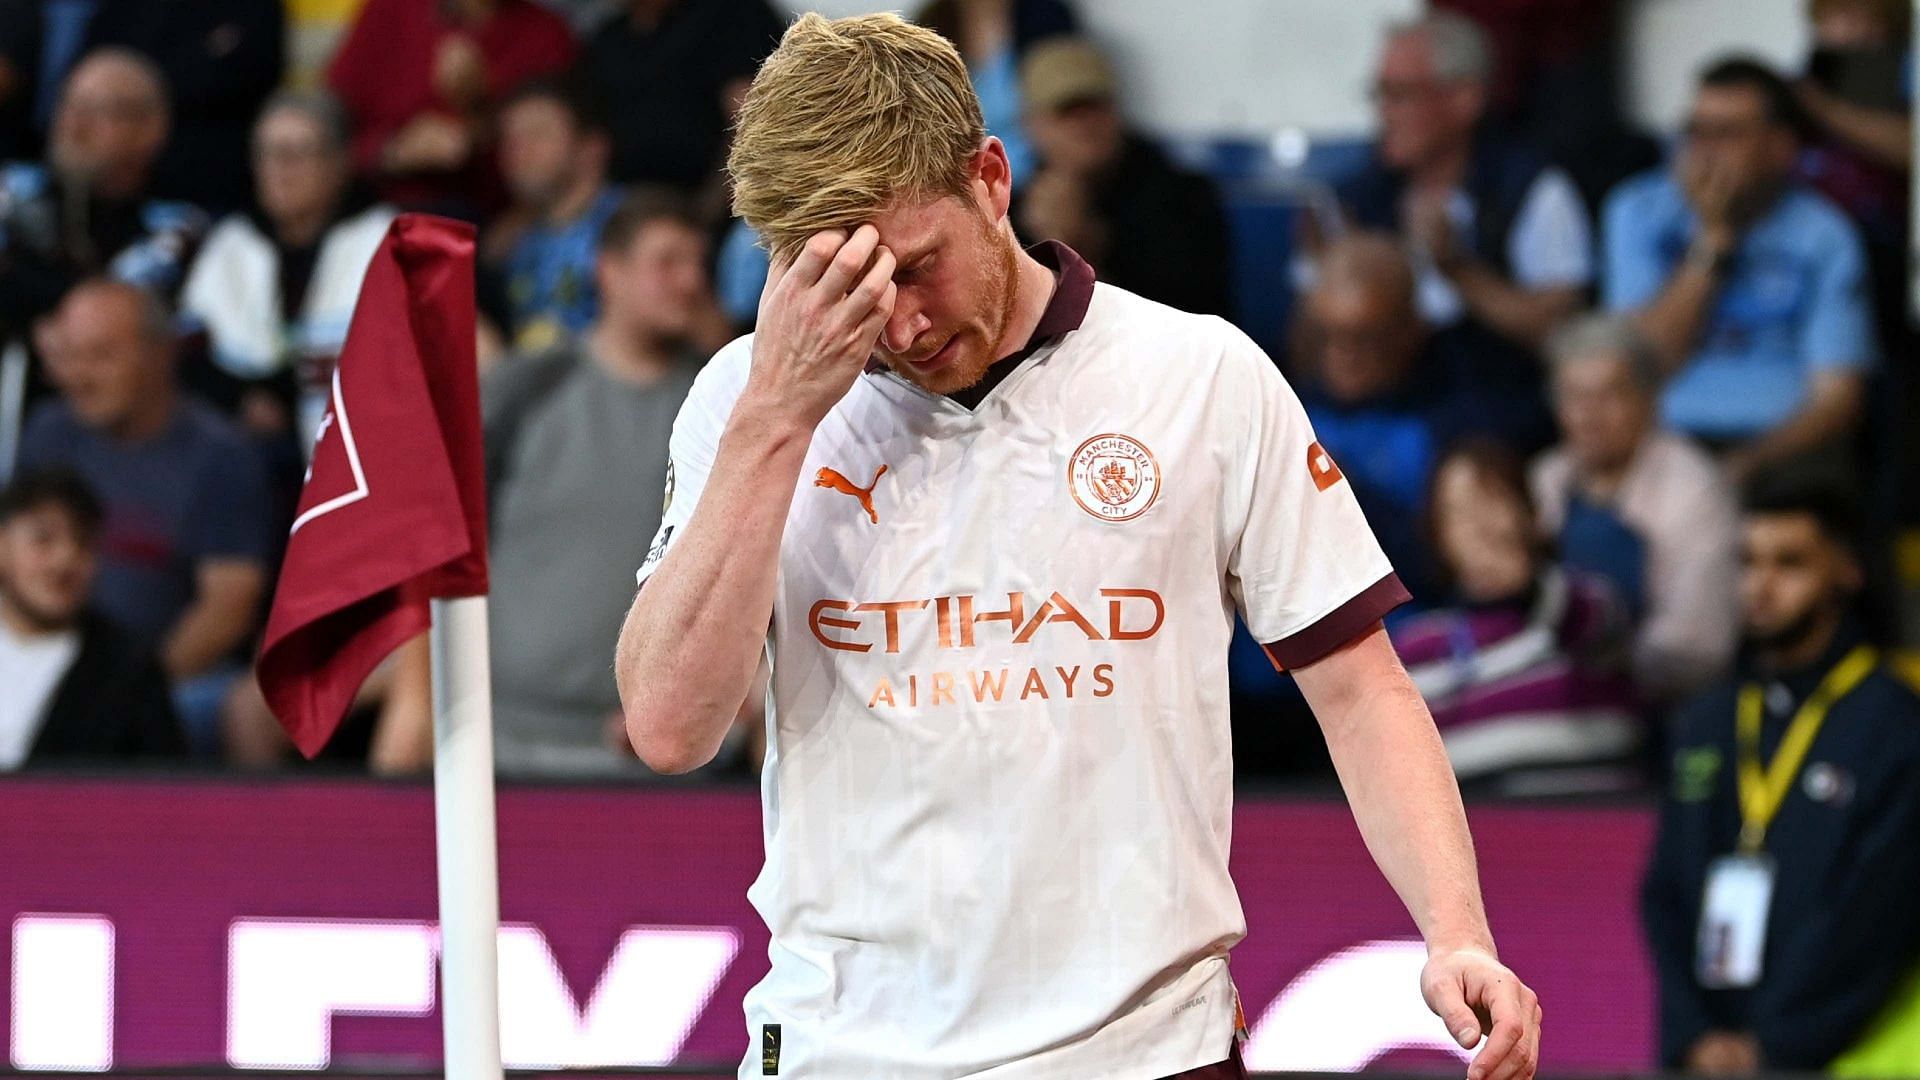 De Bruyne could be sidelined for the next 4 months with a knee injury